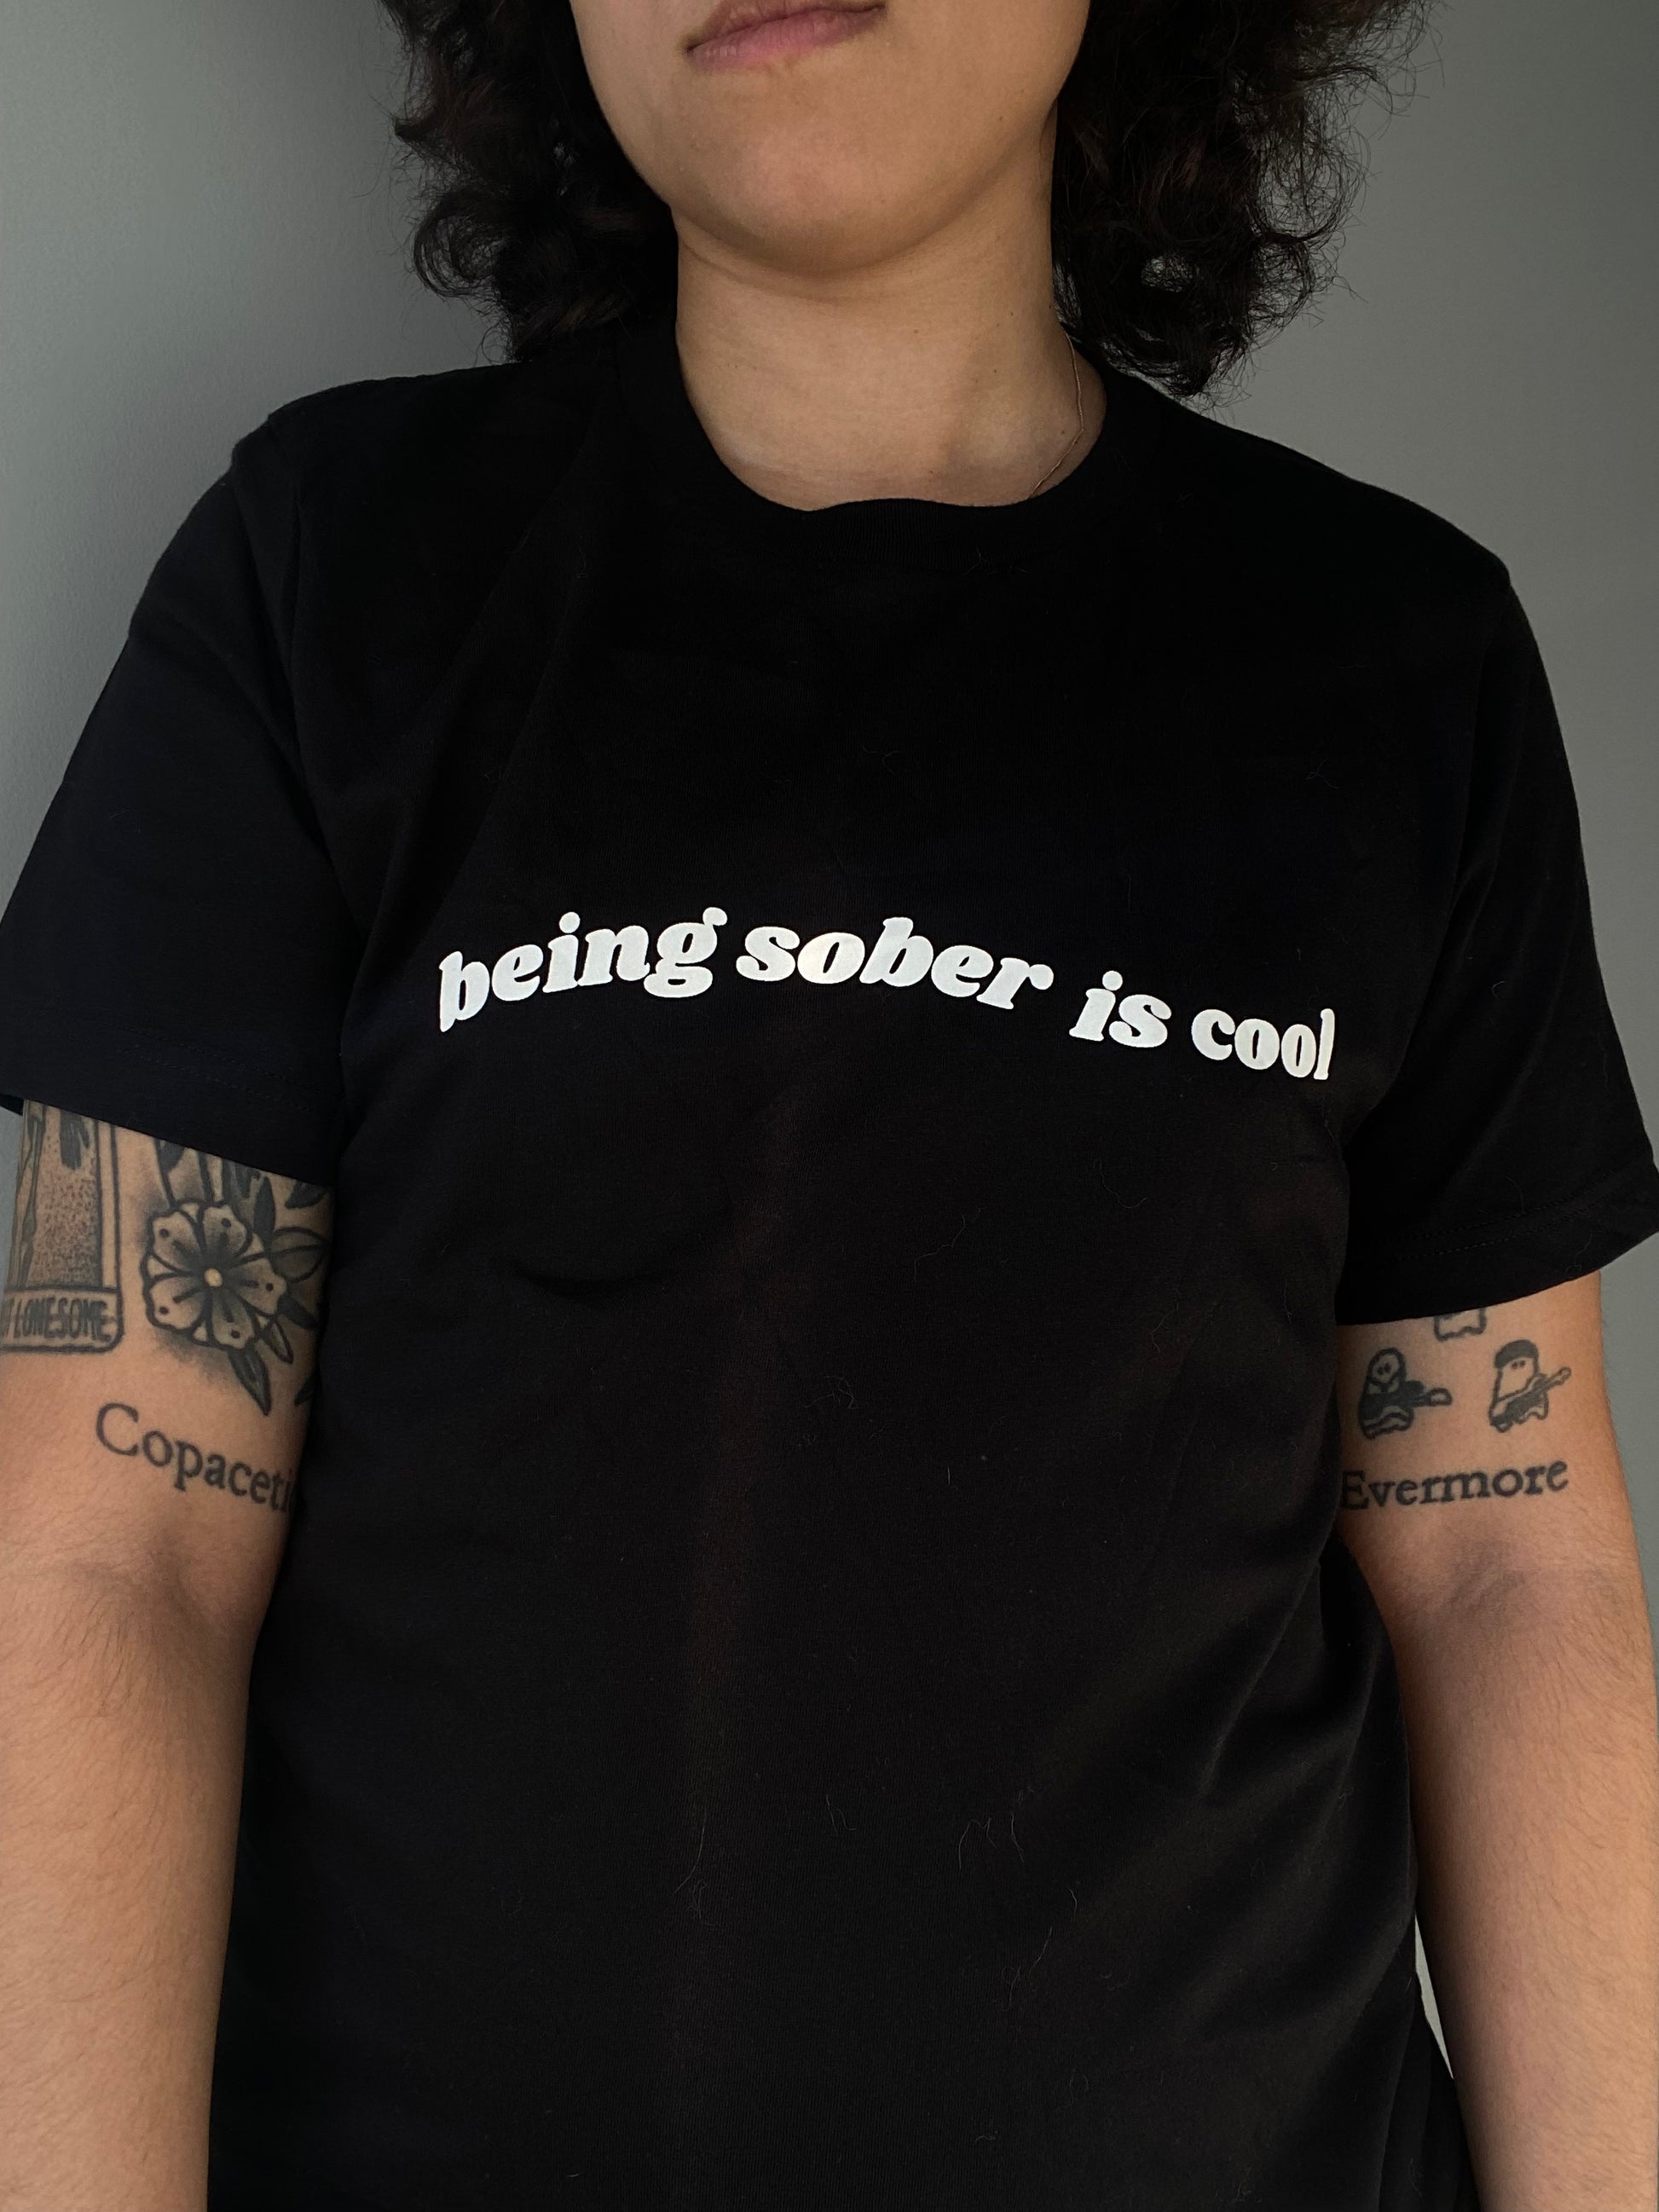 Mental health awareness and sobriety and substance abuse recovery t shirts